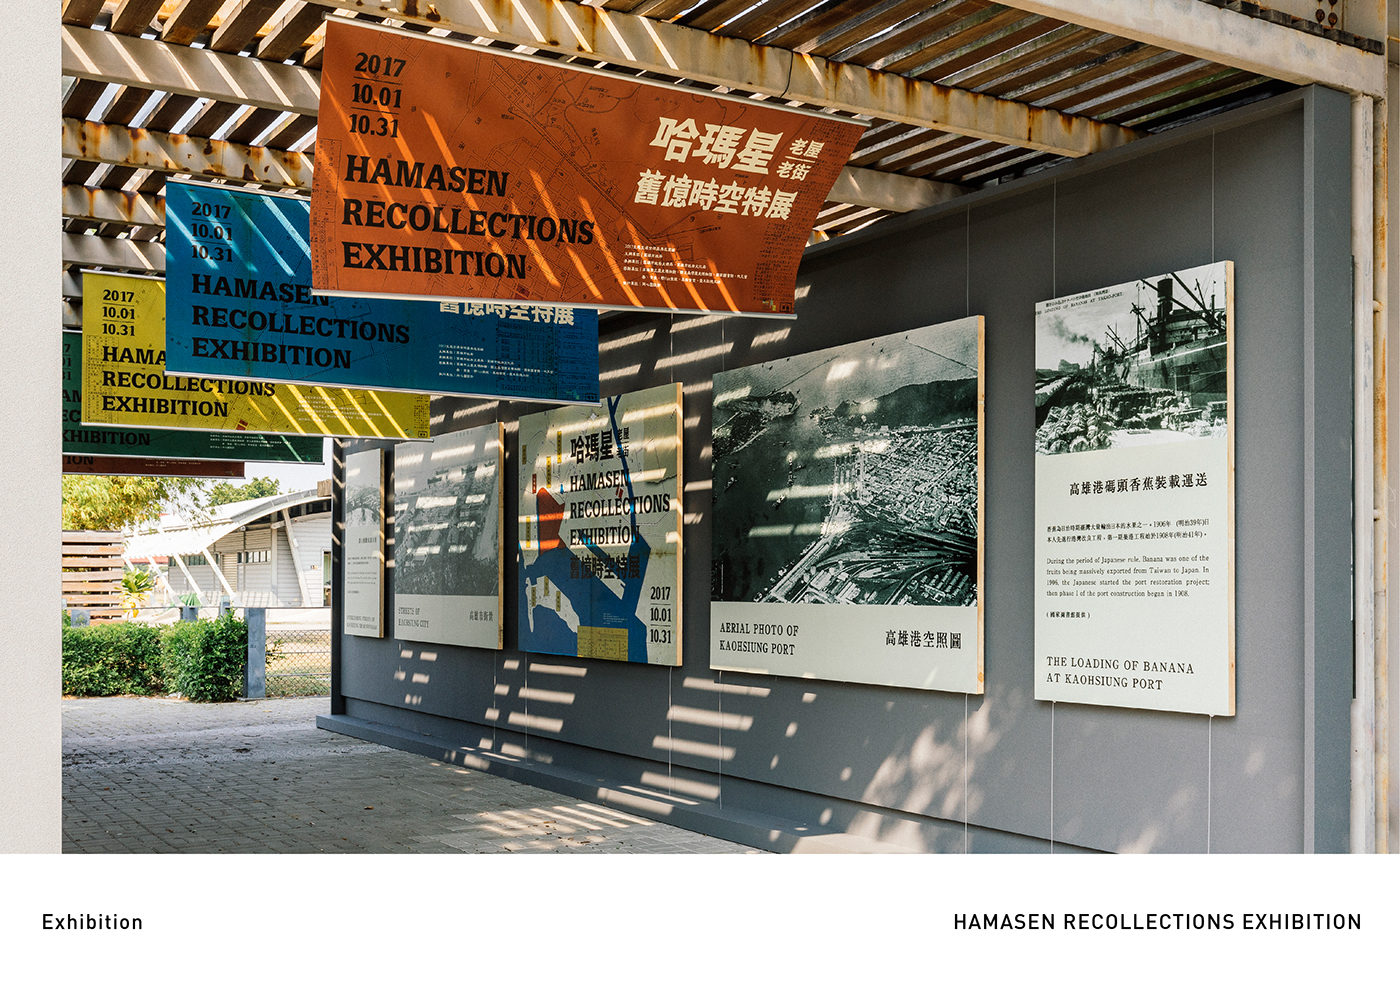 graphic design Exhibition  ILLUSTRATION  old house newborn taiwan hamasen Recollections Photography 